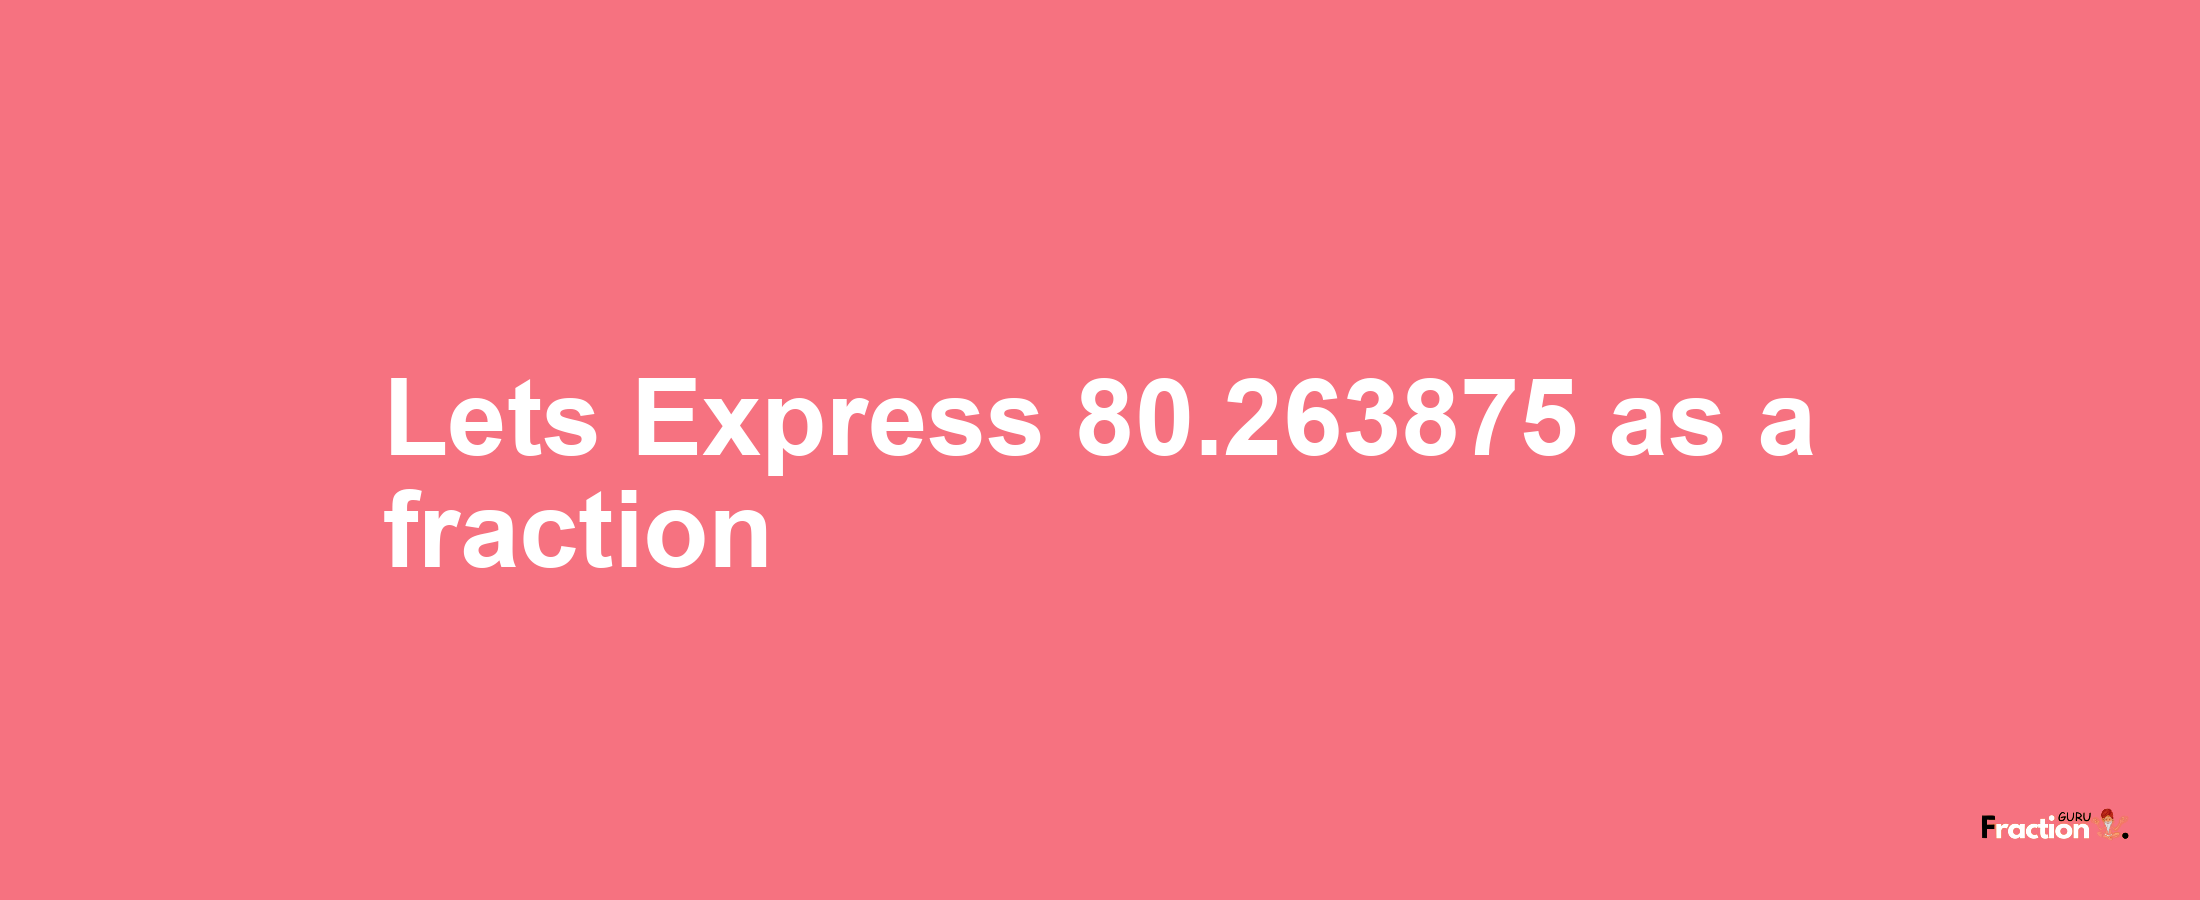 Lets Express 80.263875 as afraction